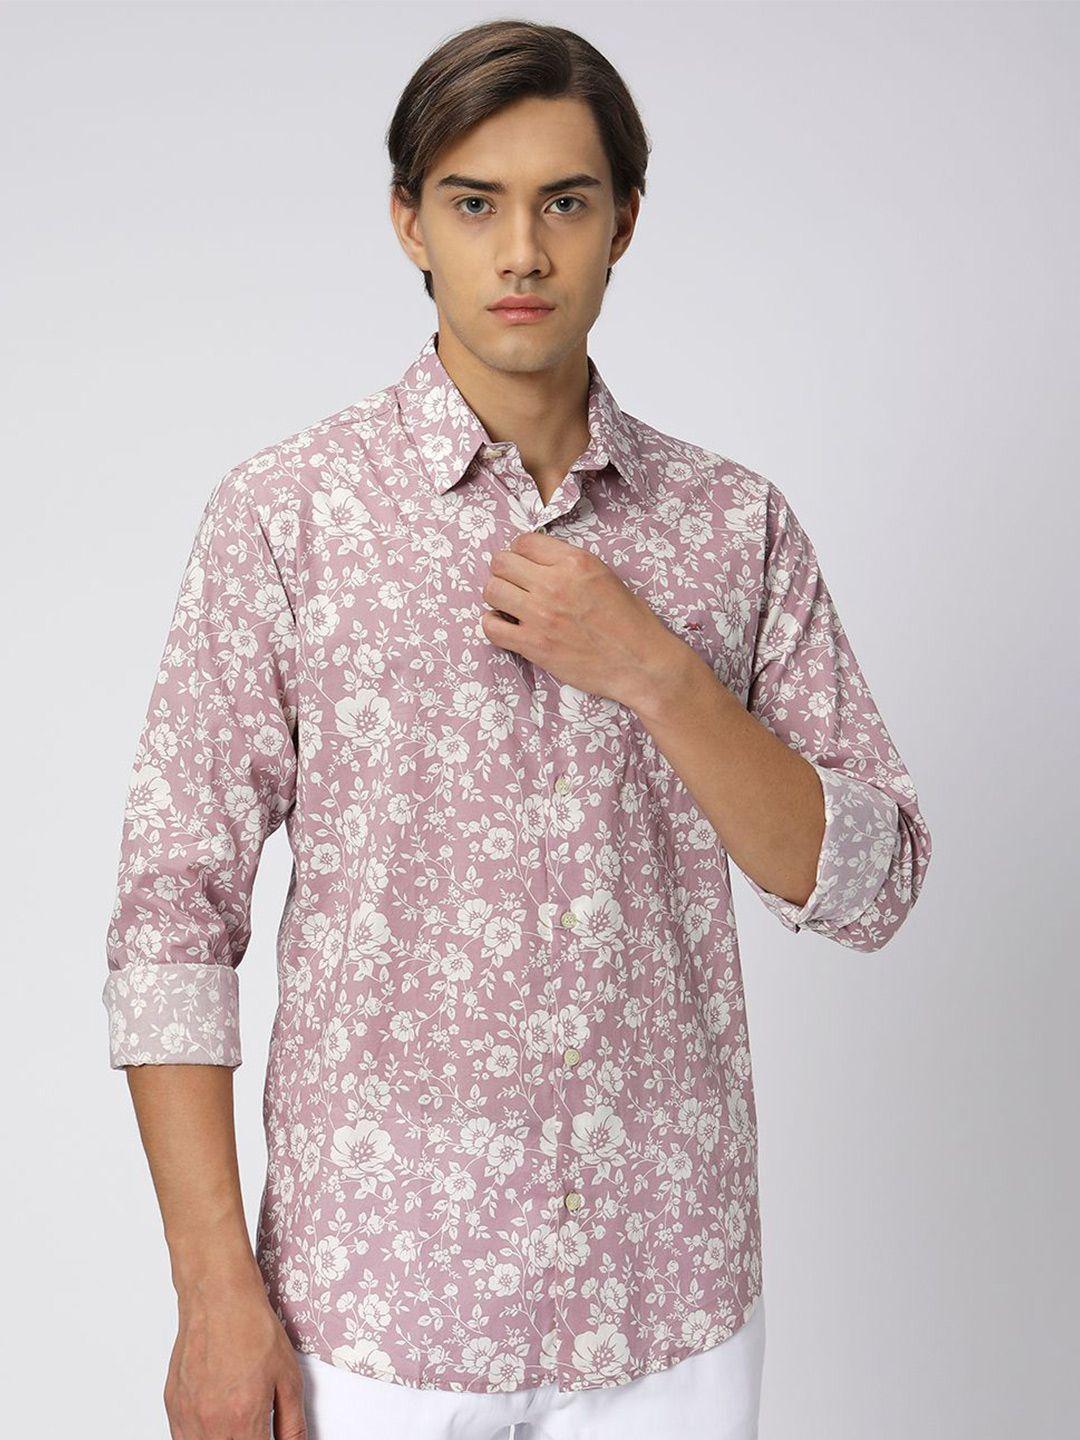 mufti slim fit floral printed casual cotton linen shirt